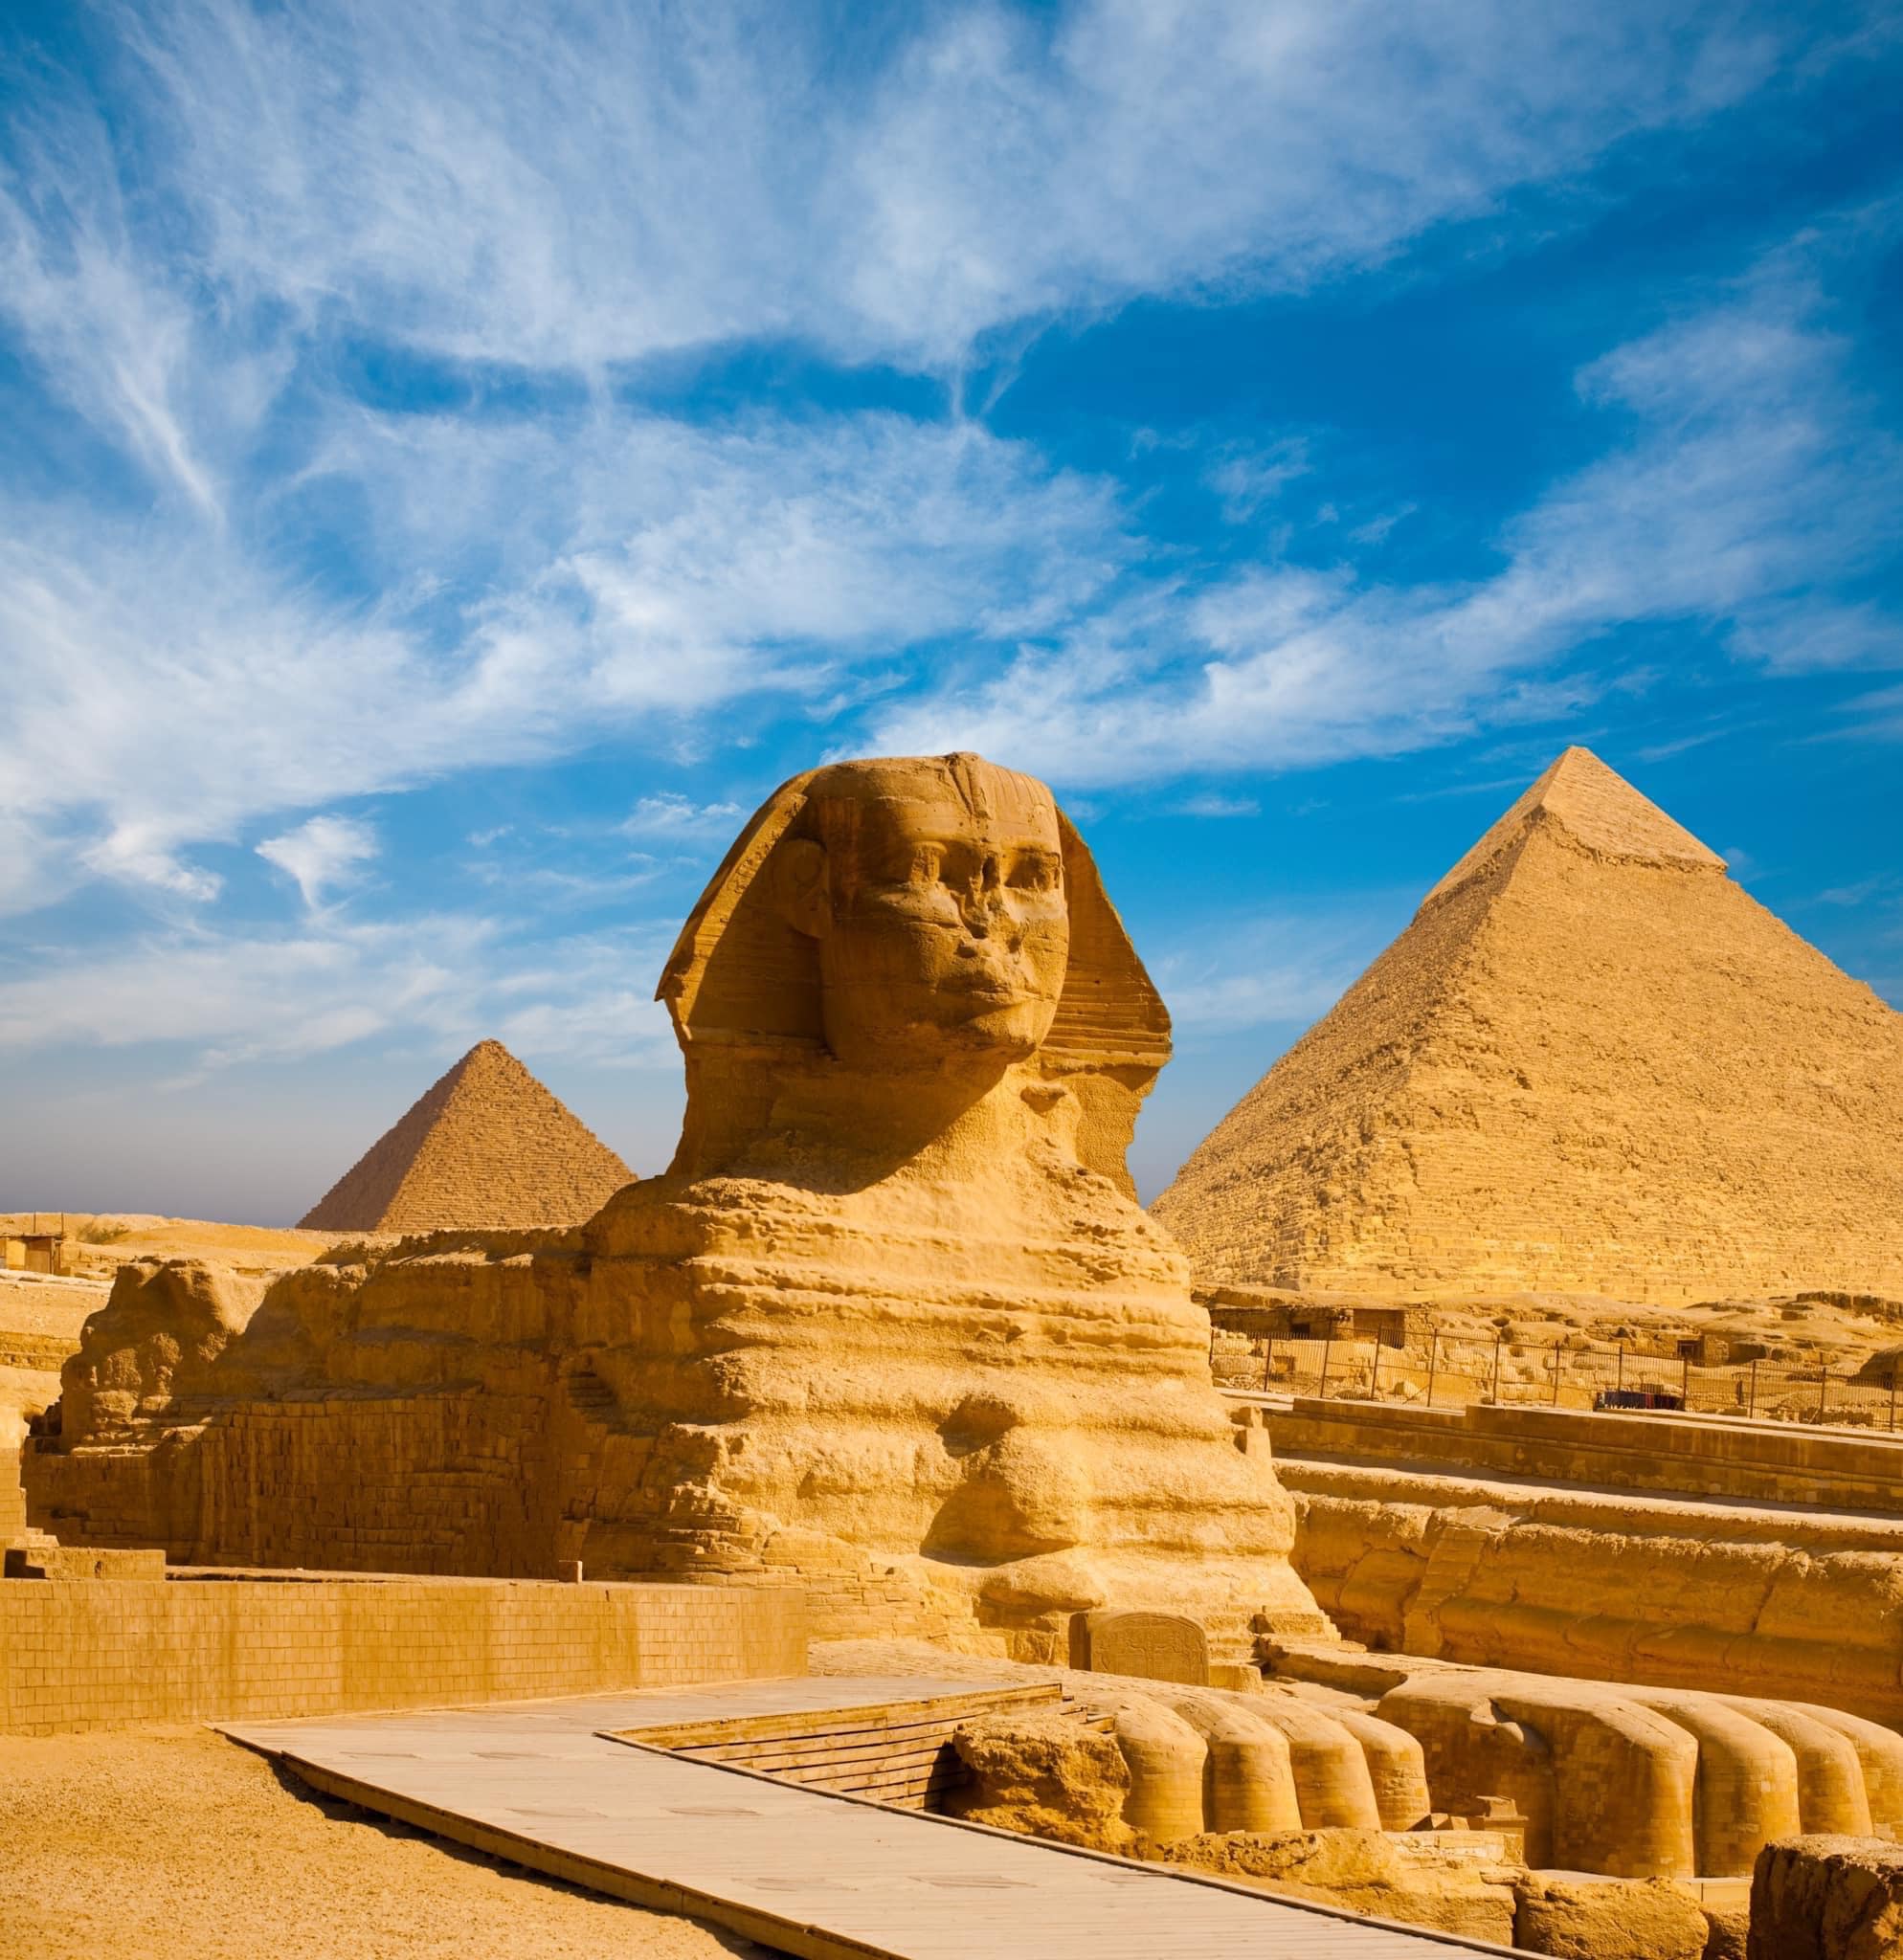 Visit the 5000-year-old temples and beauty of the Sphynx & Pyramids on a Cairo city break